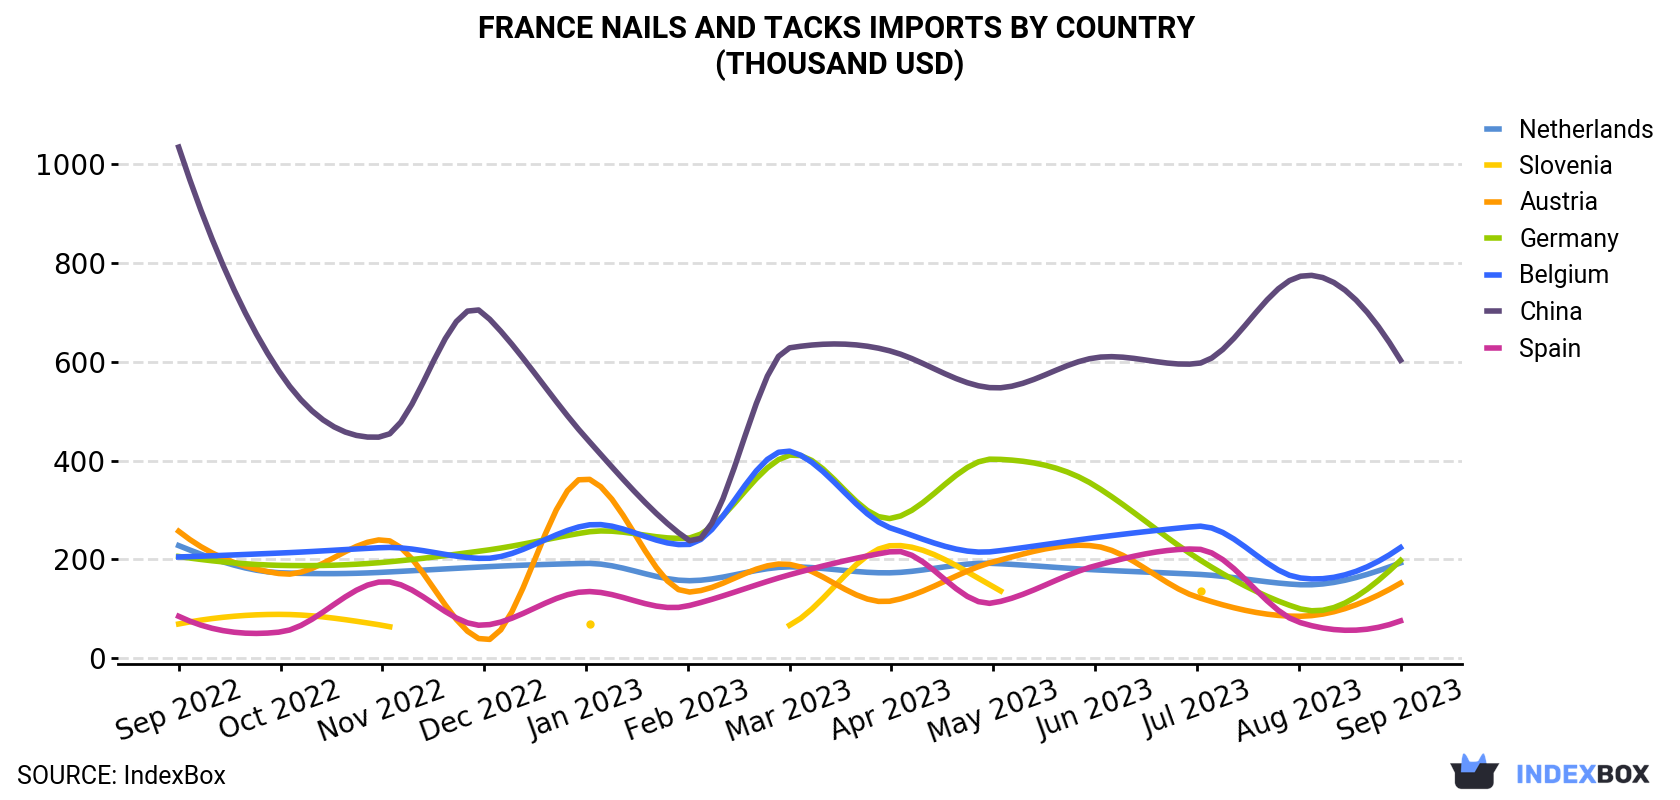 France Nails And Tacks Imports By Country (Thousand USD)